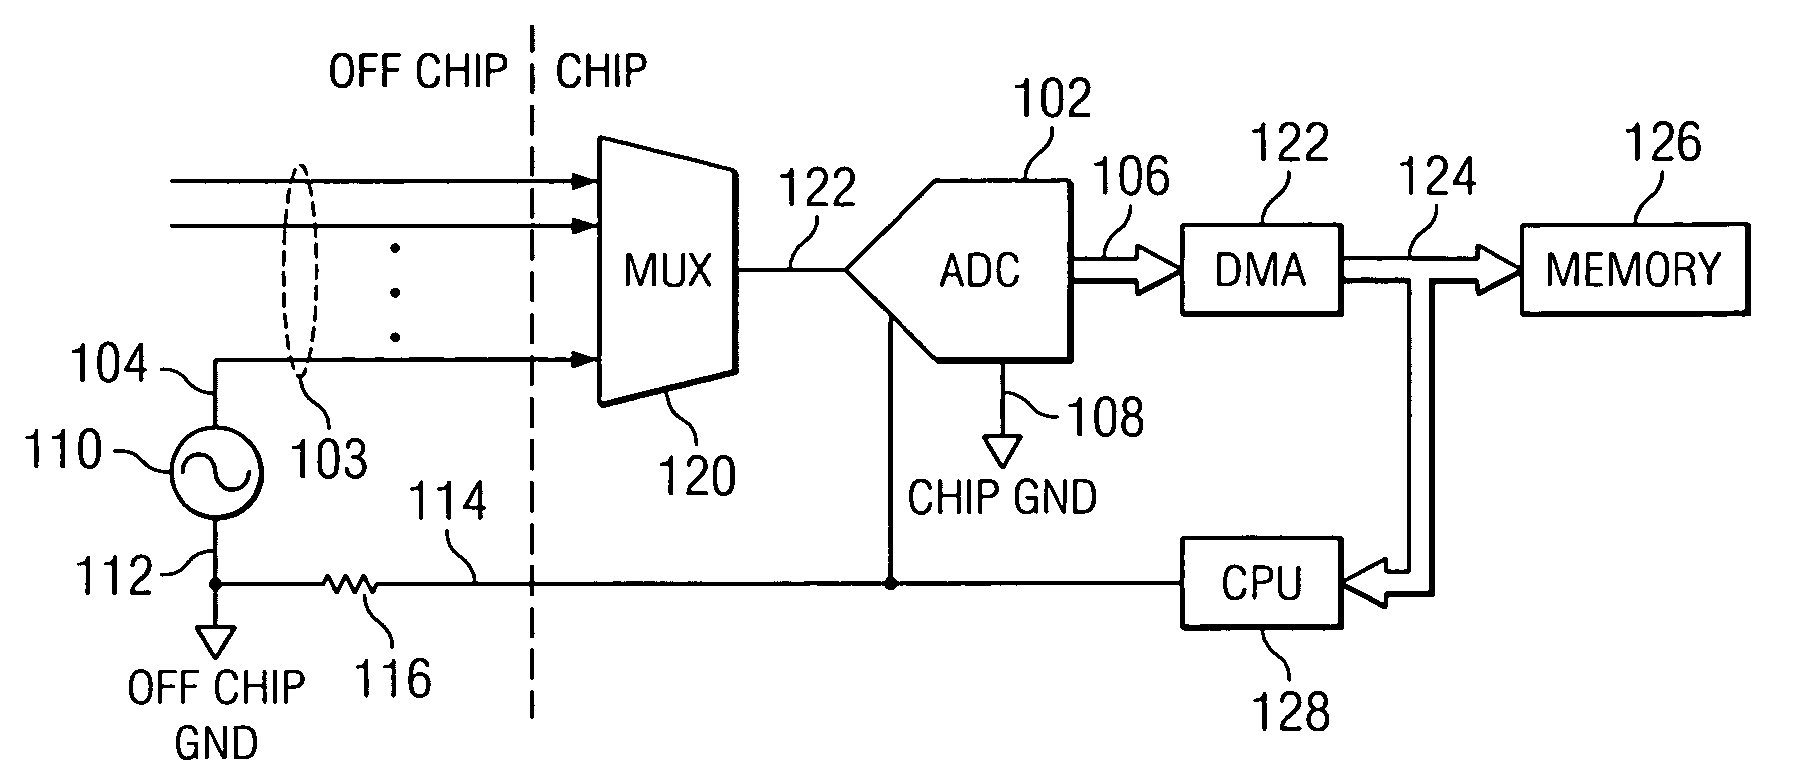 DMA controller that restricts ADC from memory without interrupting generation of digital words when CPU accesses memory